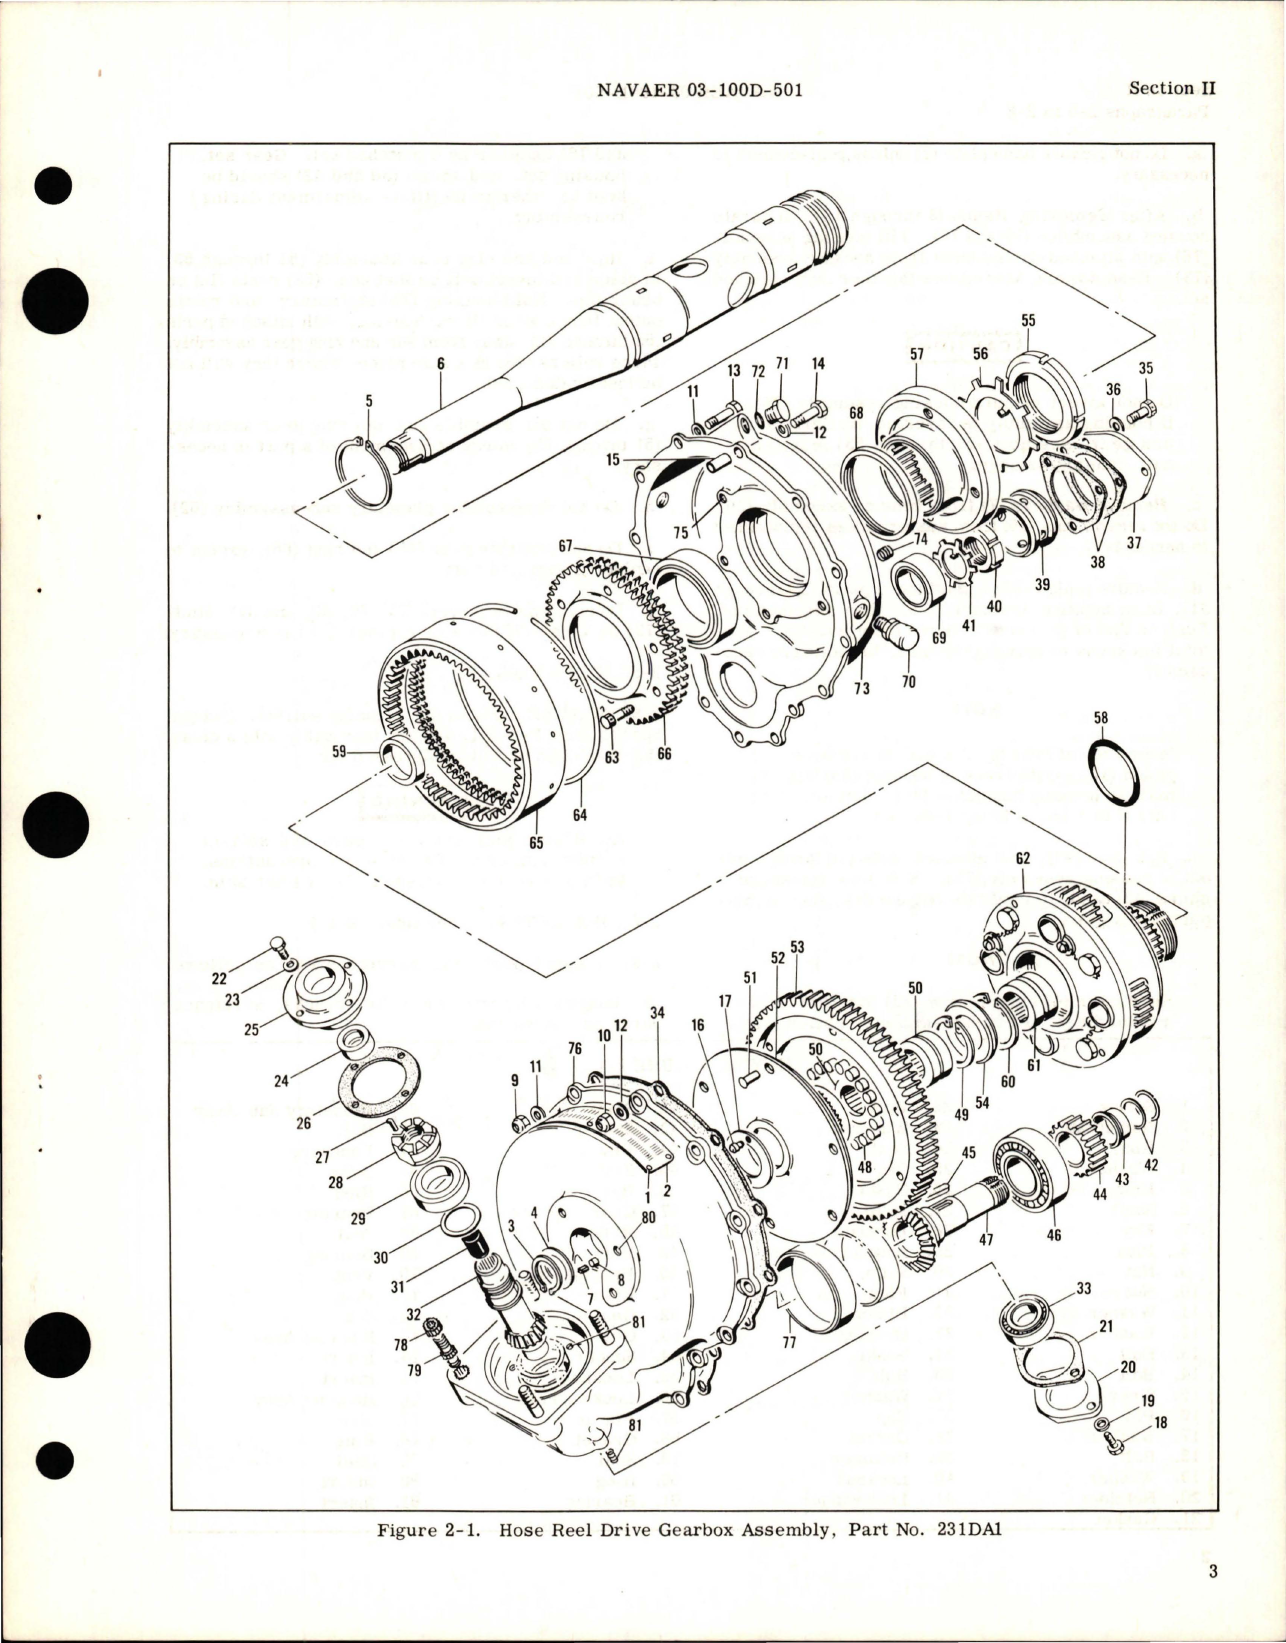 Sample page 7 from AirCorps Library document: Overhaul Instructions for Hose Reel Drive Gearbox Assembly - Part 231DA and 231DA1 